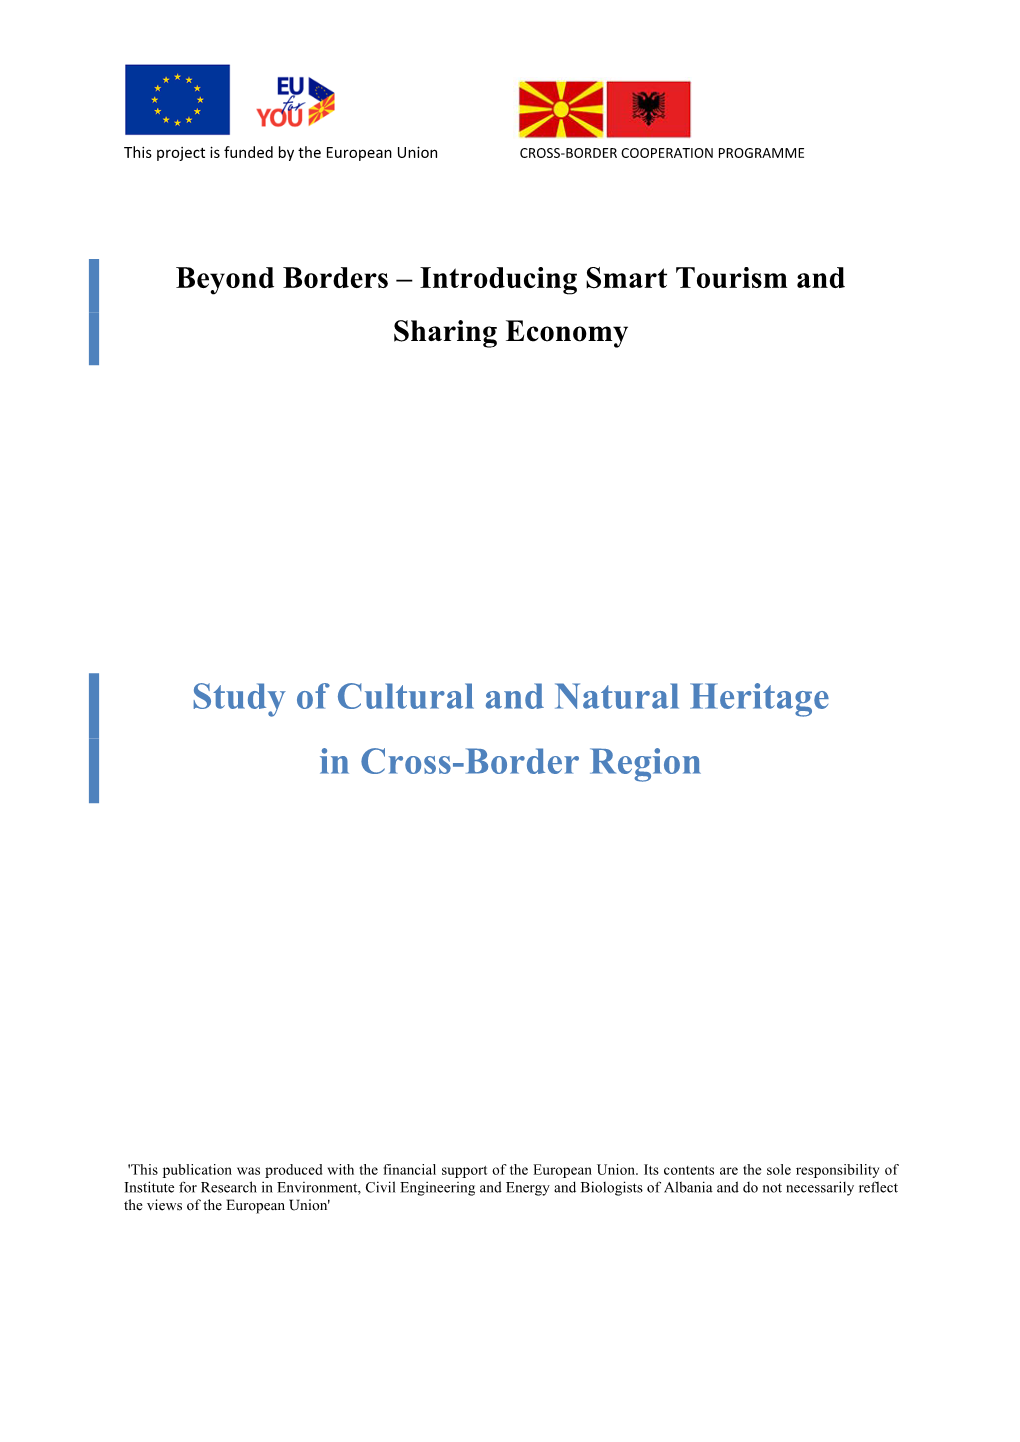 Study of Cultural and Natural Heritage in Cross-Border Region